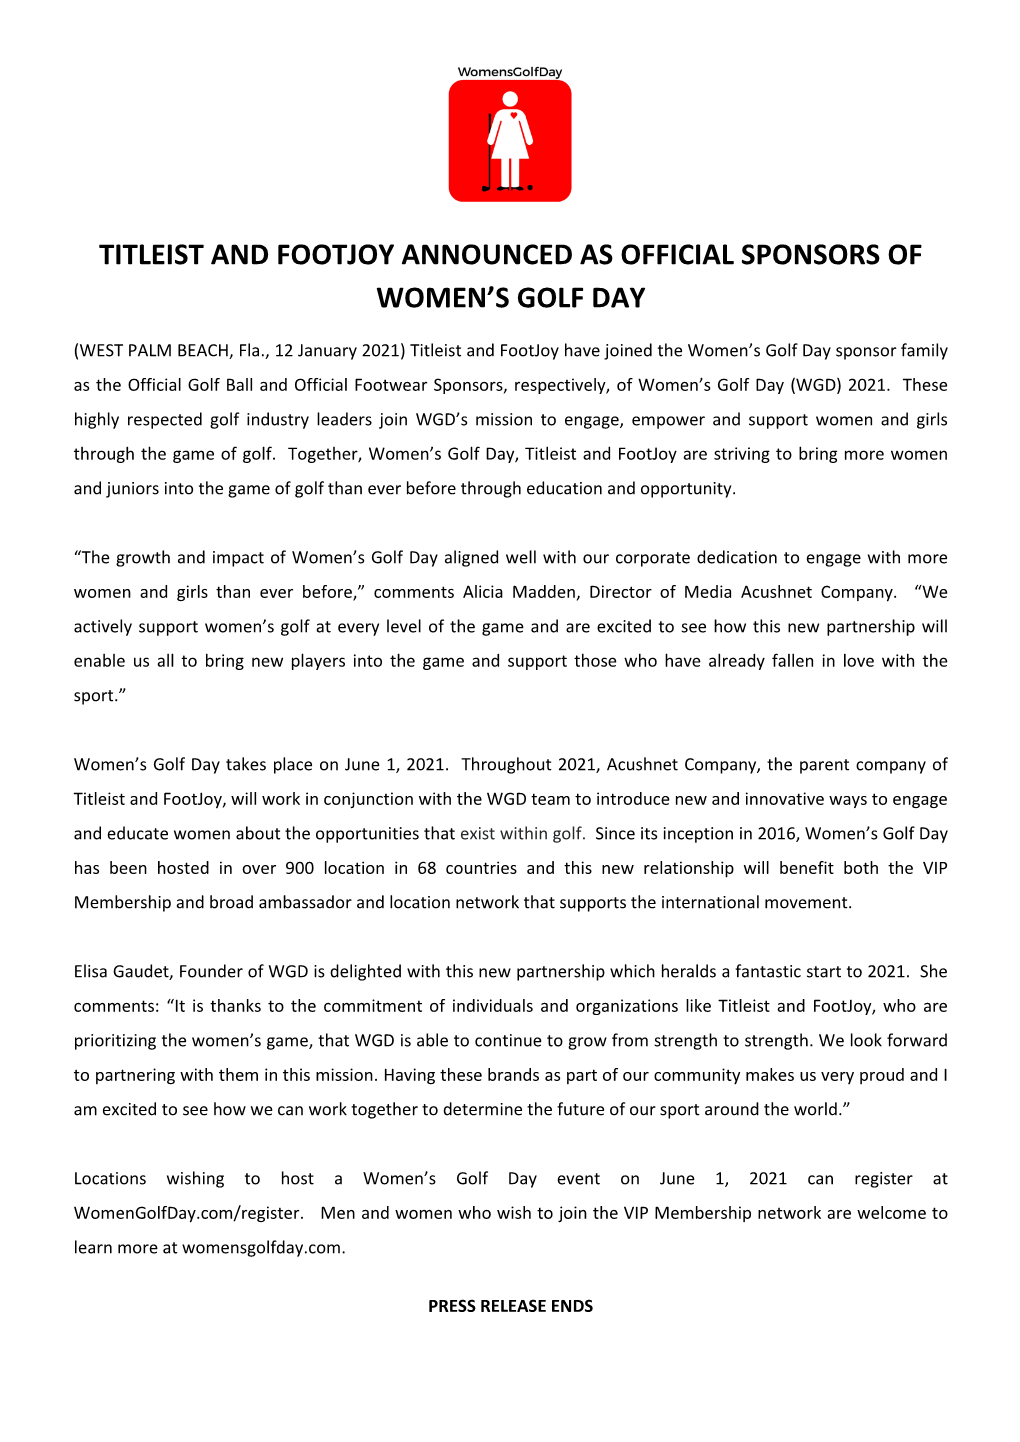 Titleist and Footjoy Announced As Women's Golf